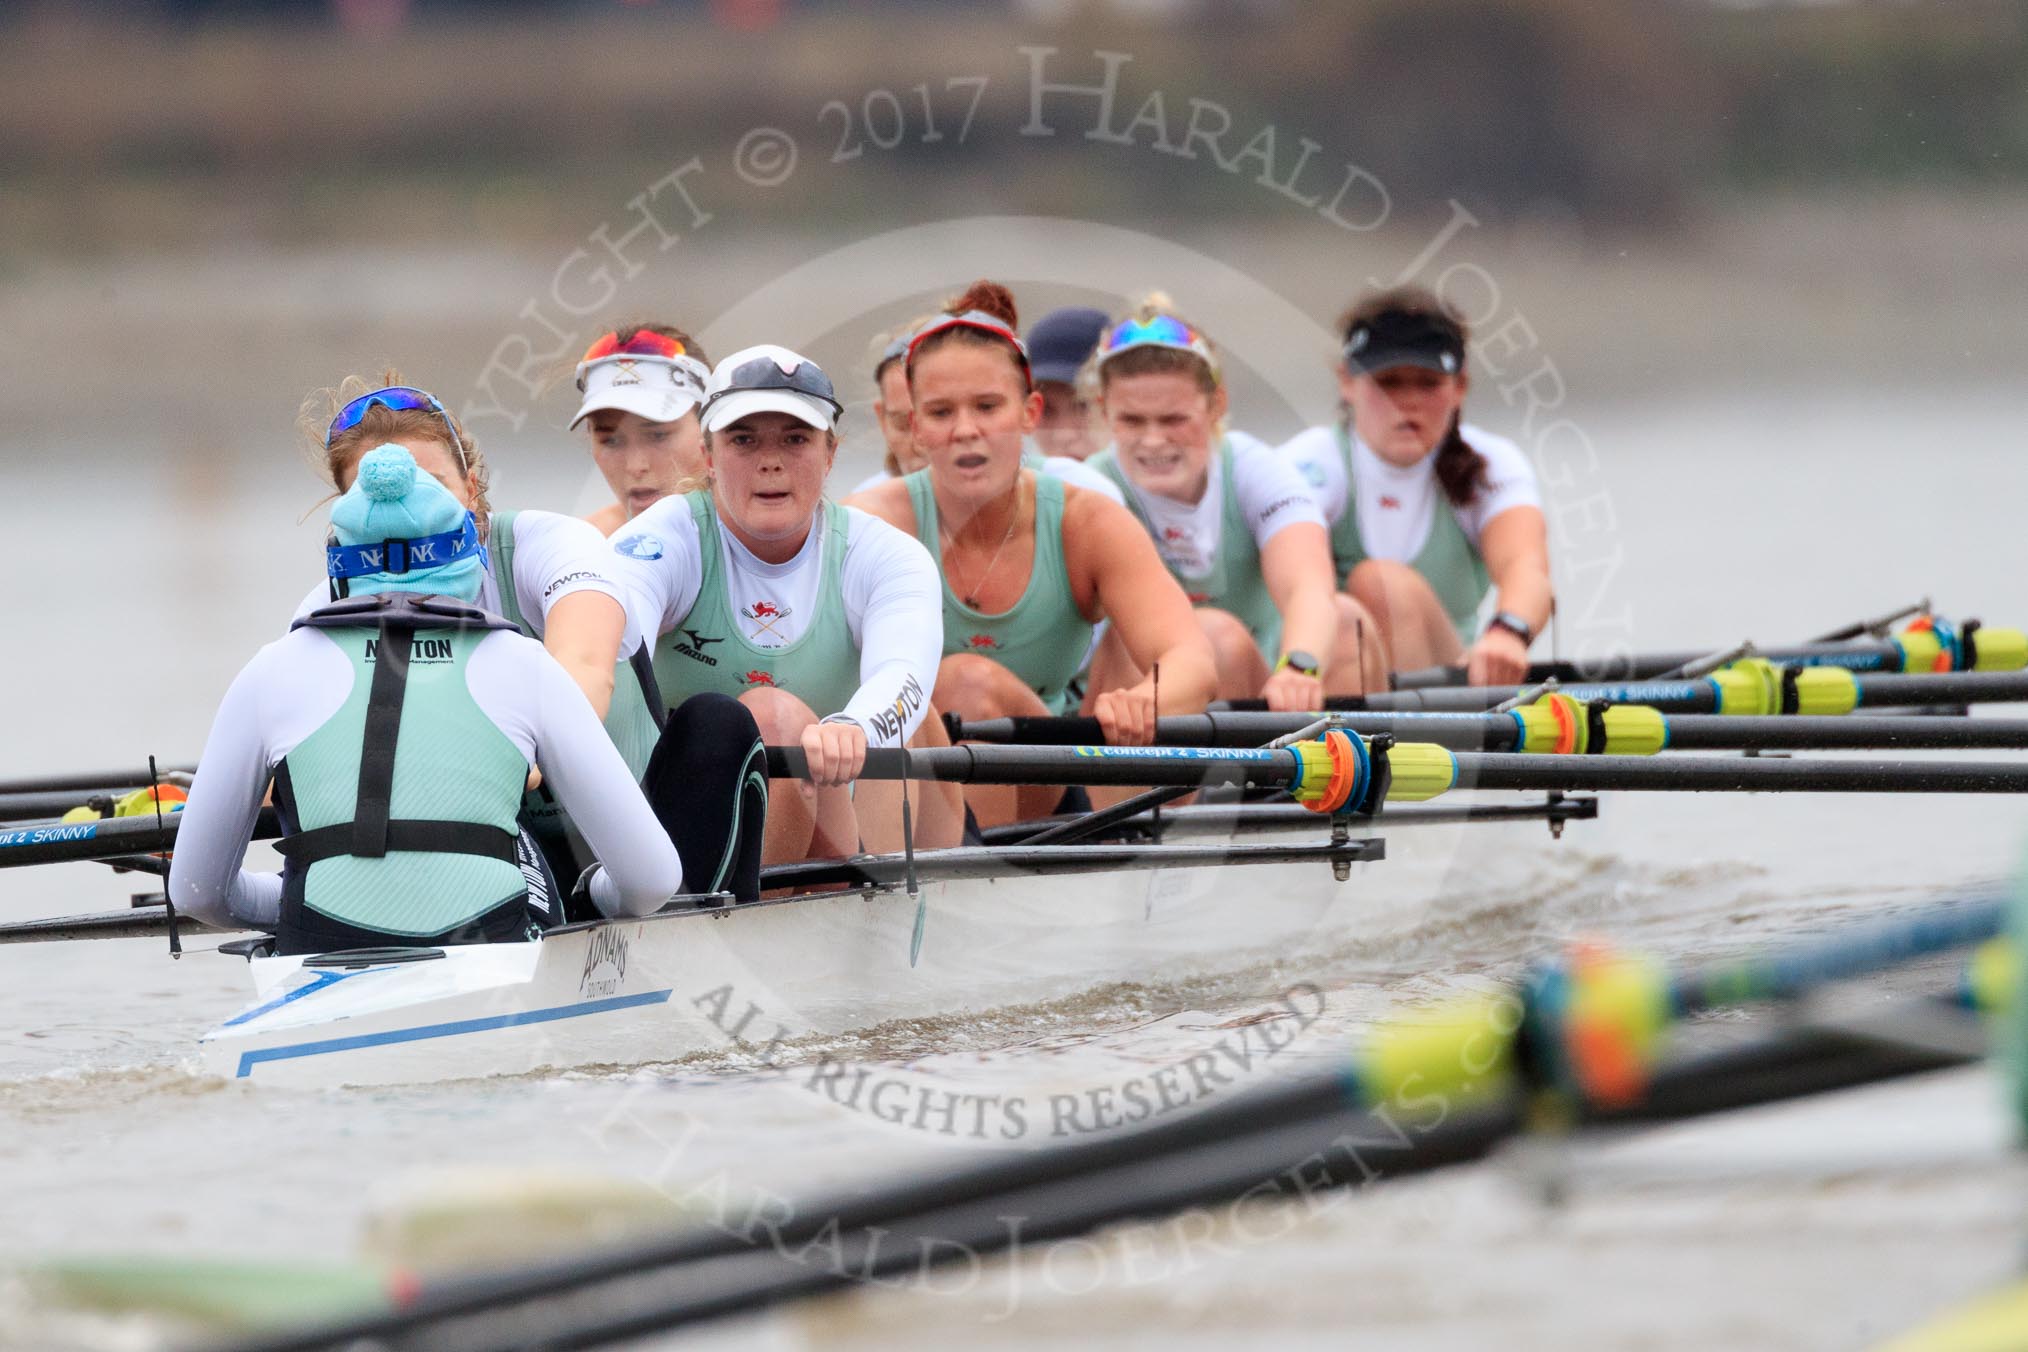 The Boat Race season 2018 - Women's Boat Race Trial Eights (CUWBC, Cambridge): Expecto Patronum:  Cox-Sophie Shapter, stroke-Alice White,  7-Abigail Parker, 6-Thea Zabell, 5-Kelsey Barolak, 4-Laura Foster, 3-Sally O Brien, 2-Millie Perrin, bow-Eve Caroe.
River Thames between Putney Bridge and Mortlake,
London SW15,

United Kingdom,
on 05 December 2017 at 12:56, image #143